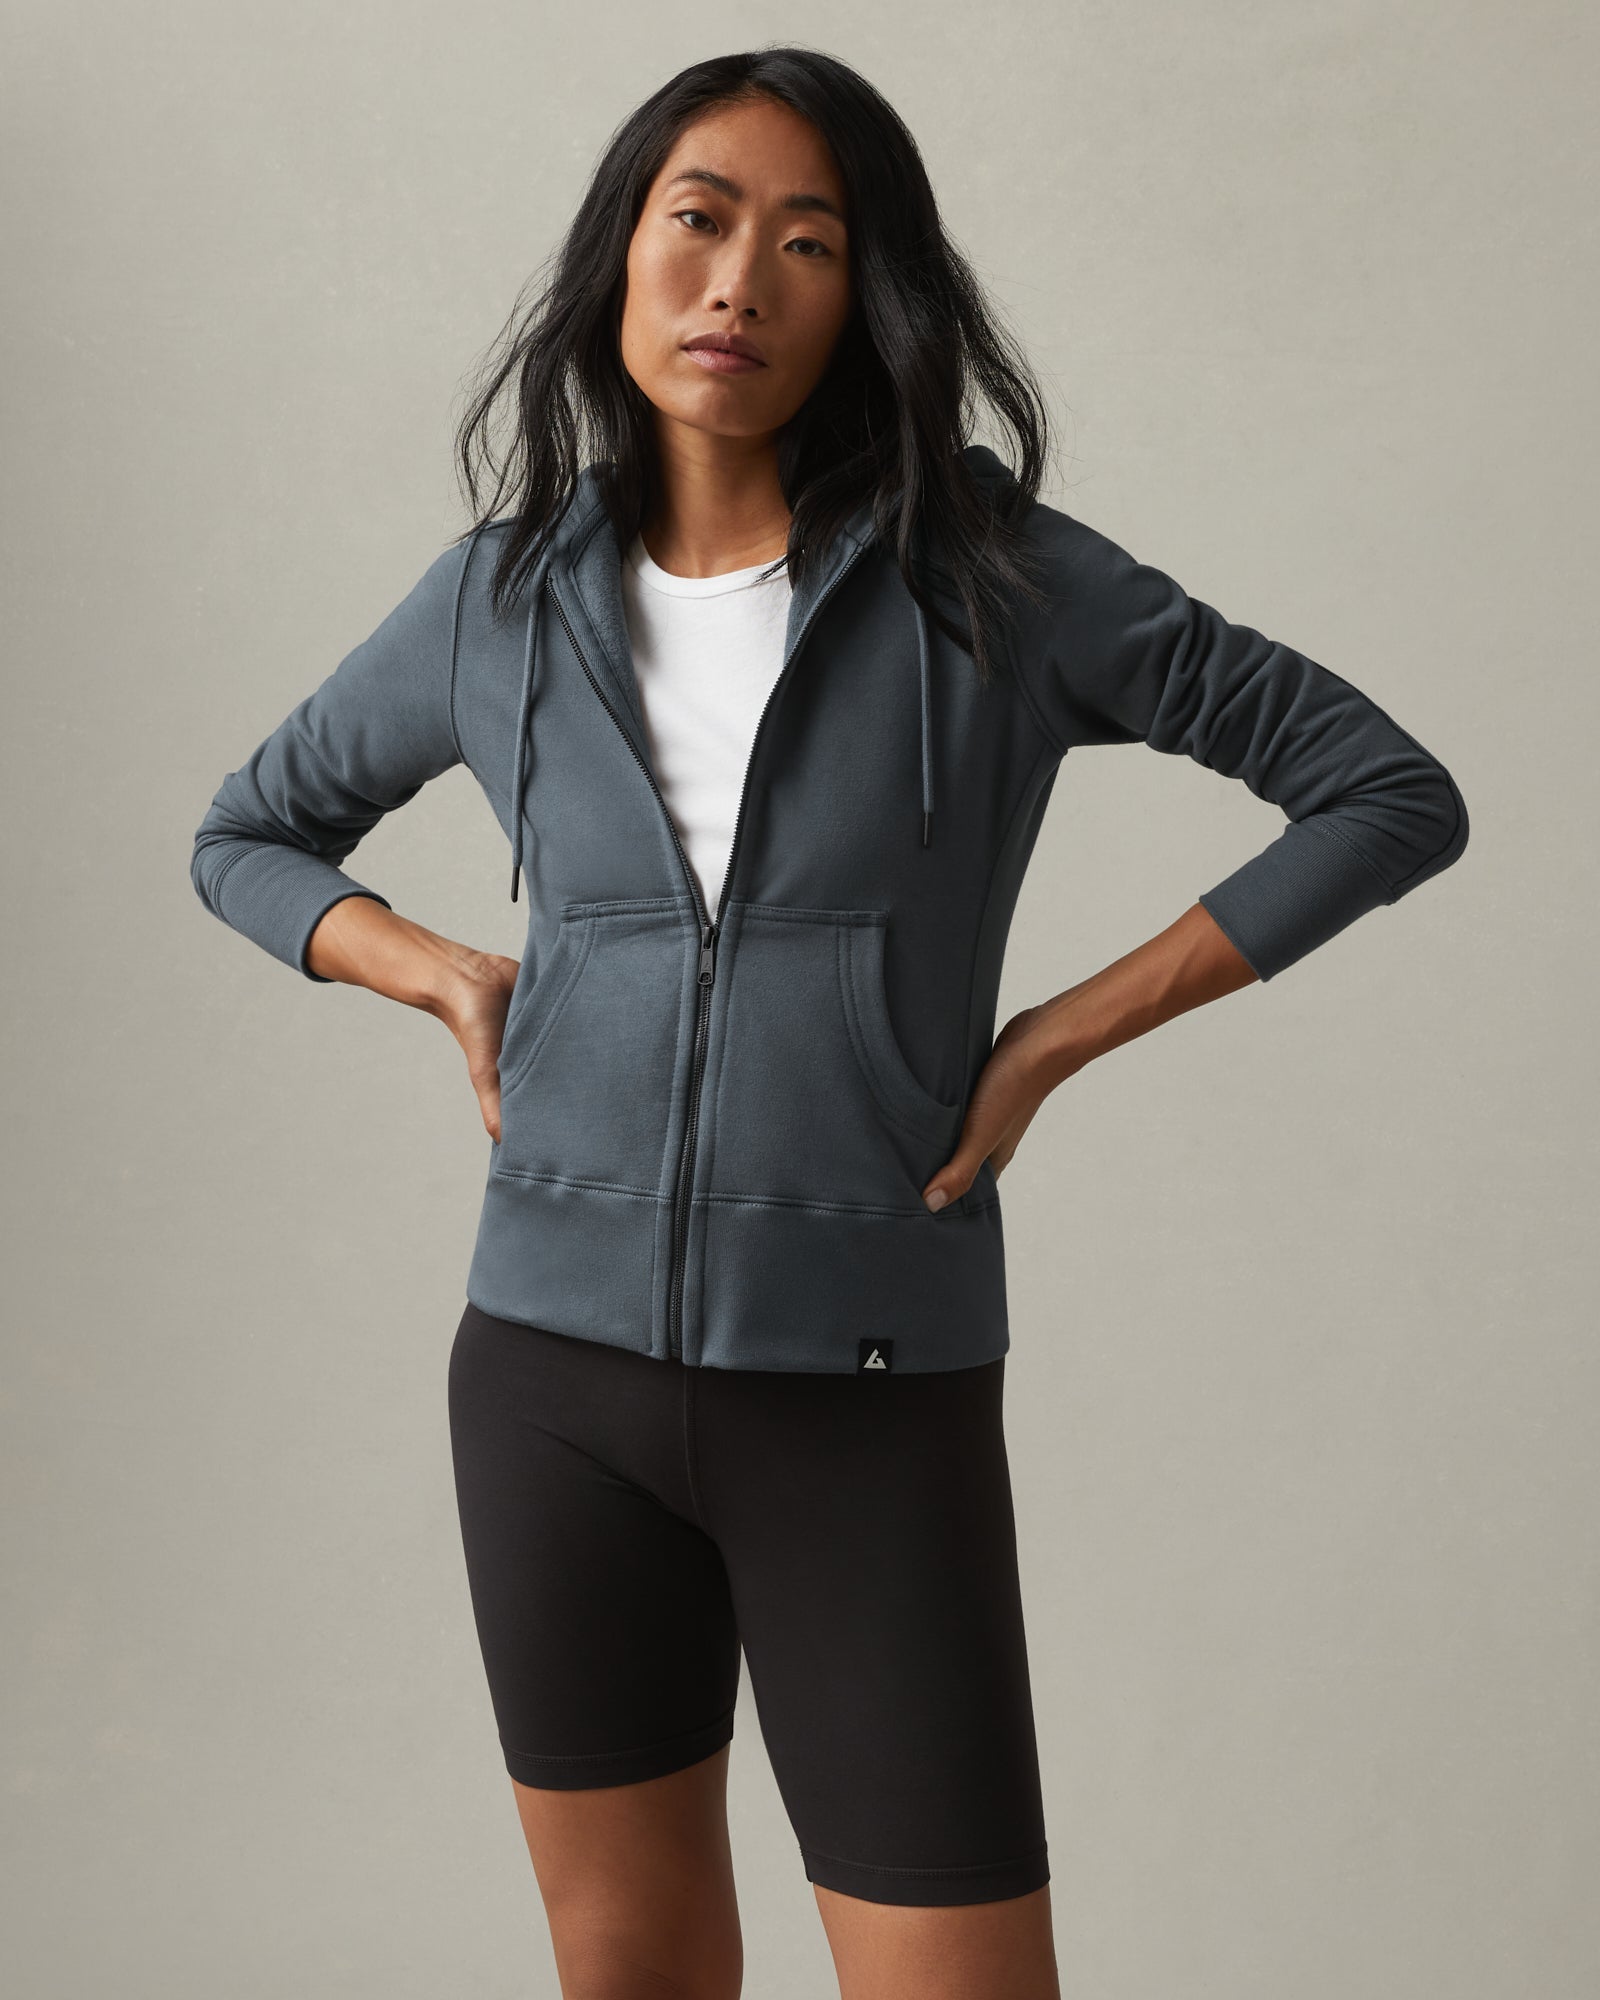 Found Lululemon Scuba Hoodie dupe for less on ! Link in bio #Out